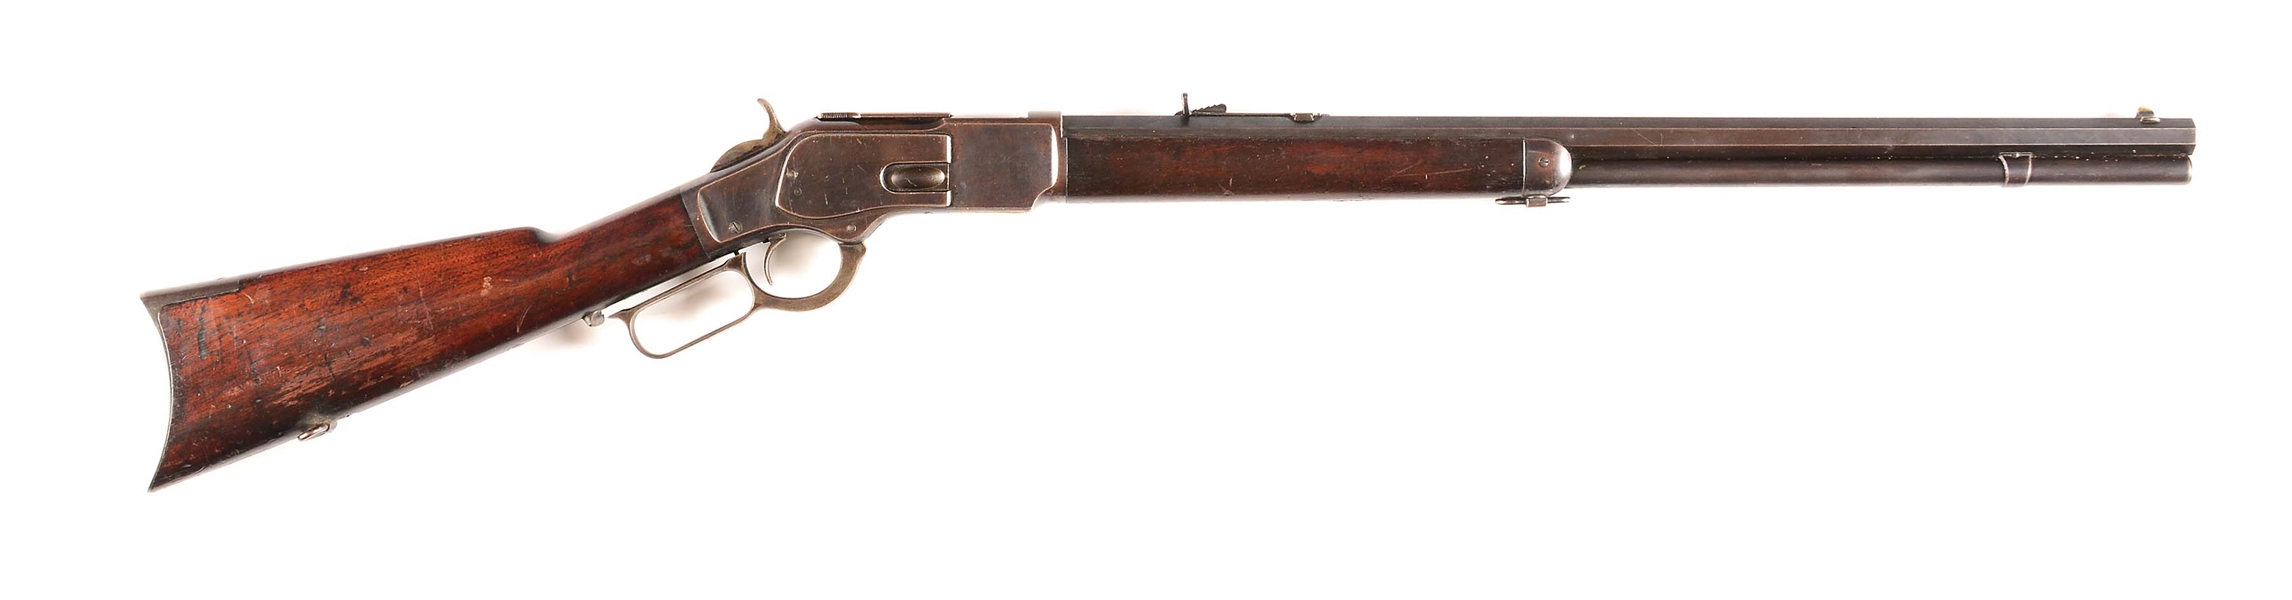 (A) EXTREMELY RARE ATLANTA POLICE WINCHESTER MODEL 1873 LEVER RIFLE (1889).